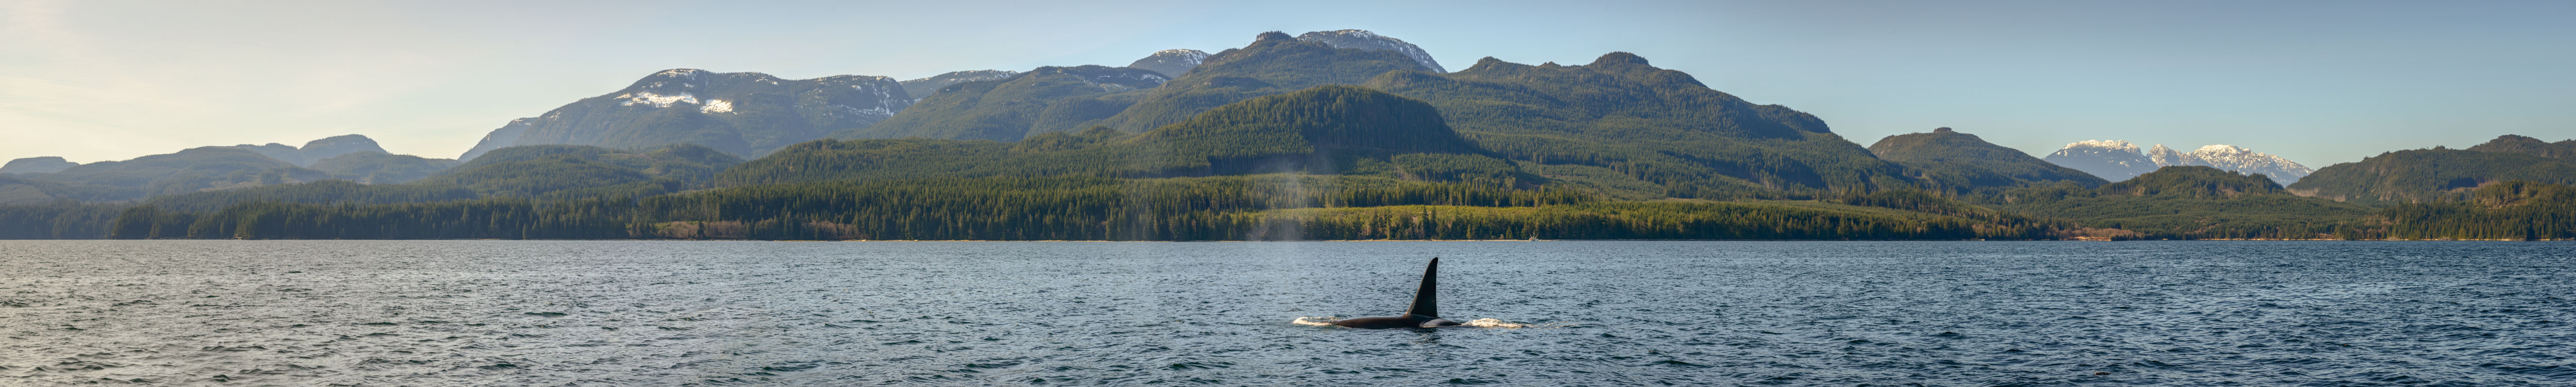 large format panoramic image of a killer whale swimming in ocean in British Columbia